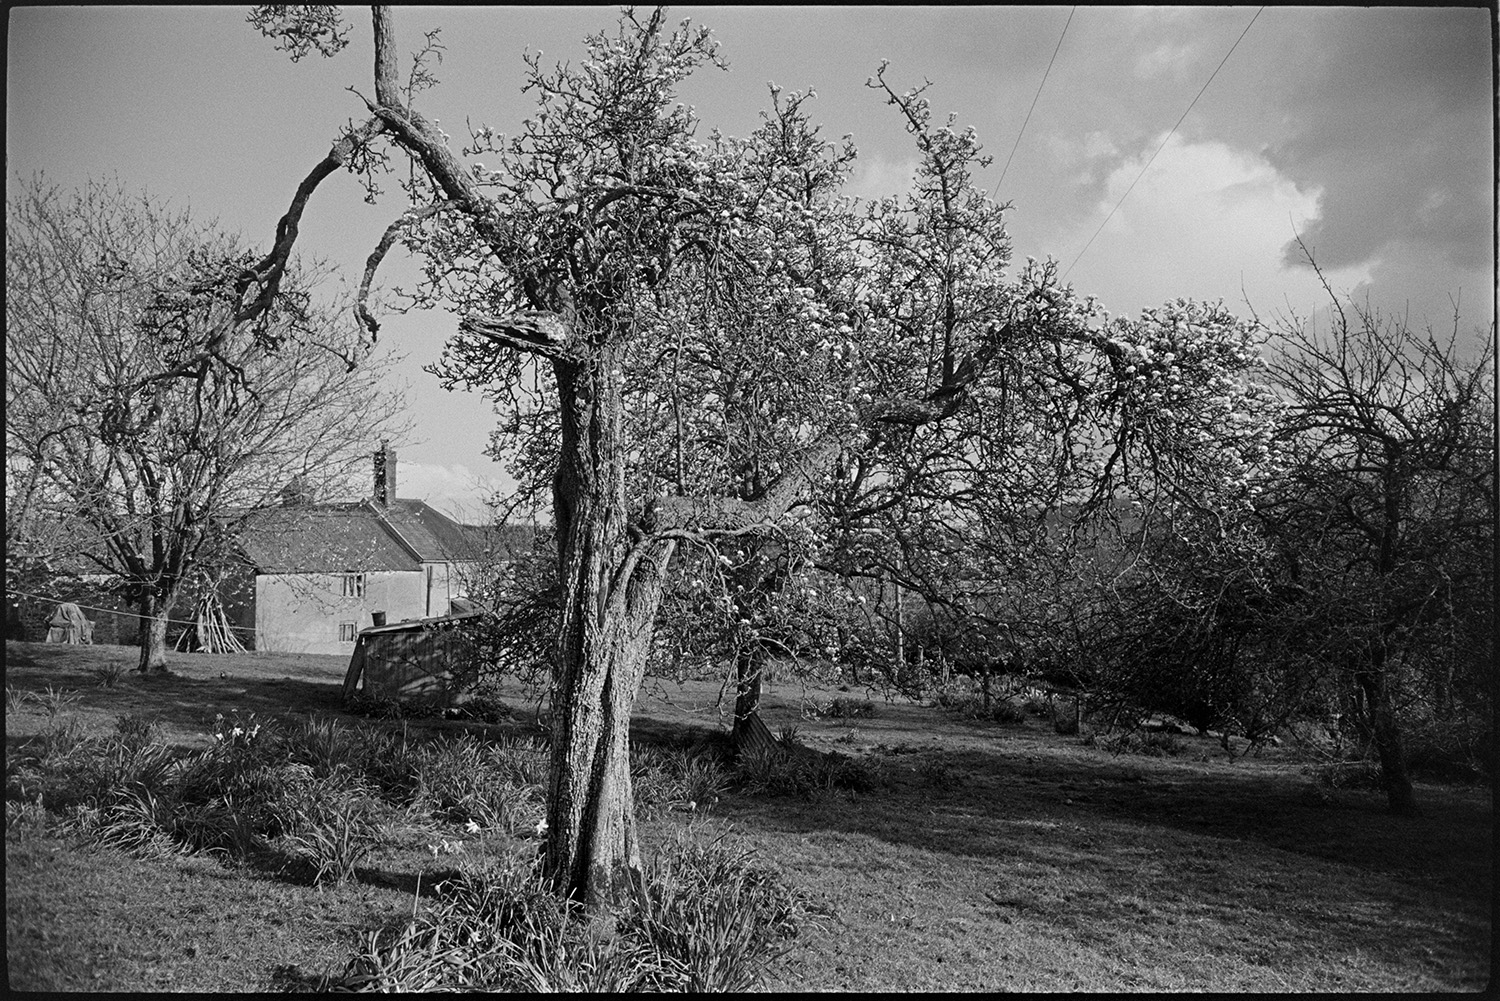 Farm orchard with sheep and chickens, poultry house.
[An orchard with blossoming trees at Harford, Landkey, with the farmhouse and a woodpile in the background.]